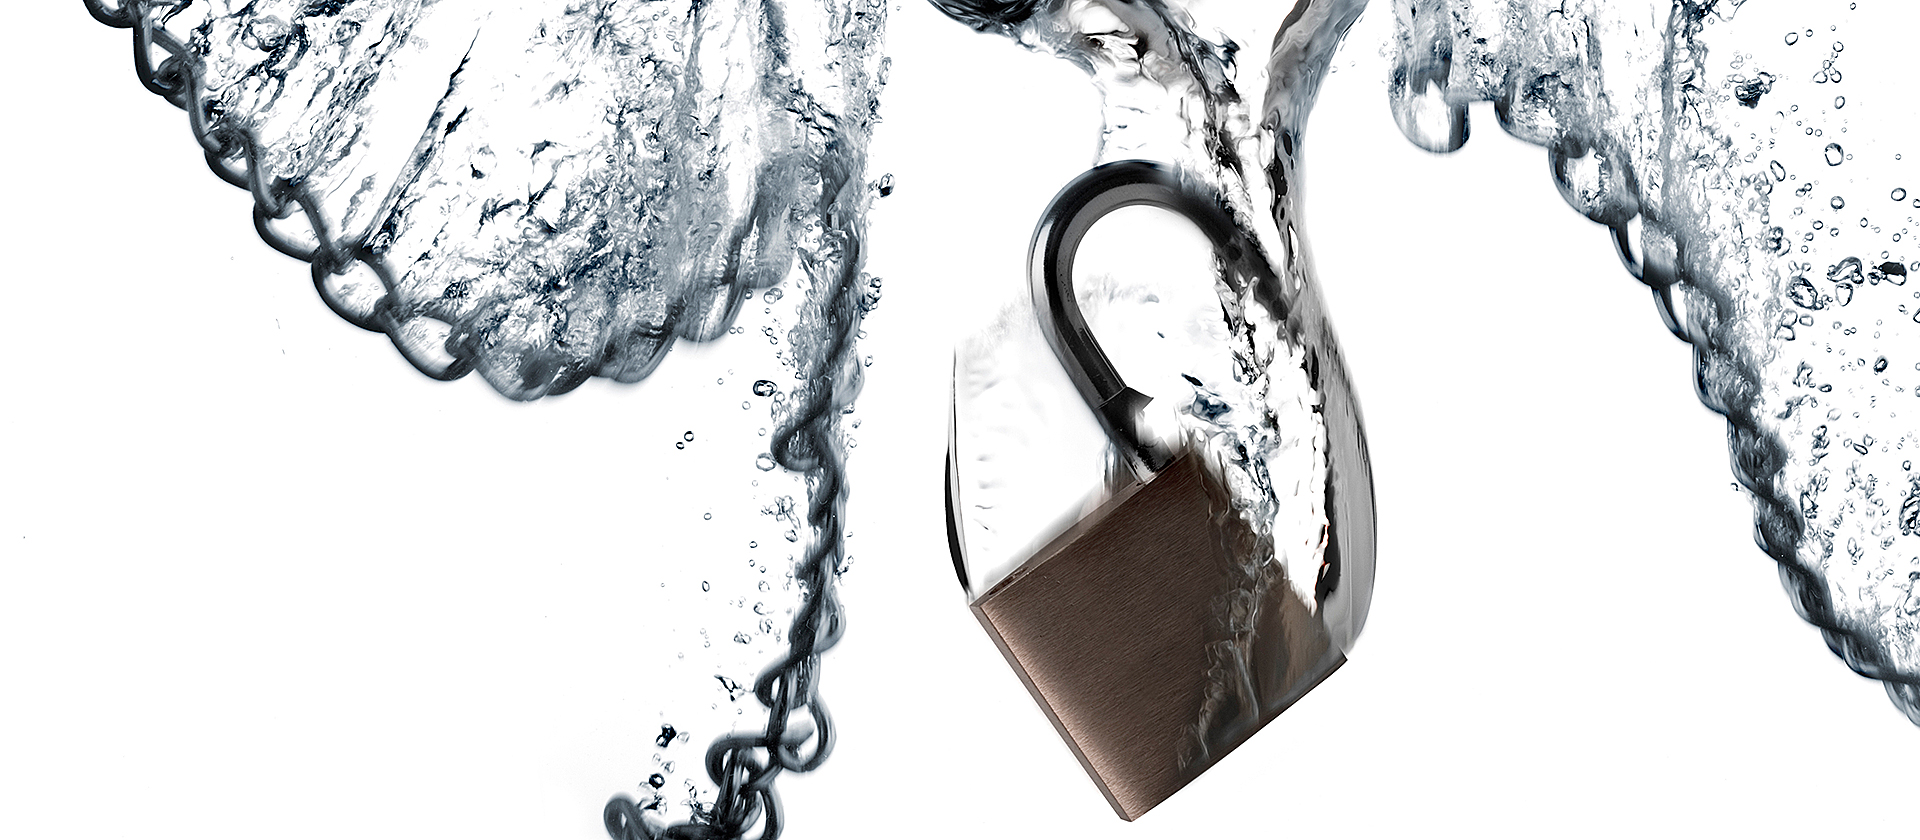 Chain and padlock submerged in water.